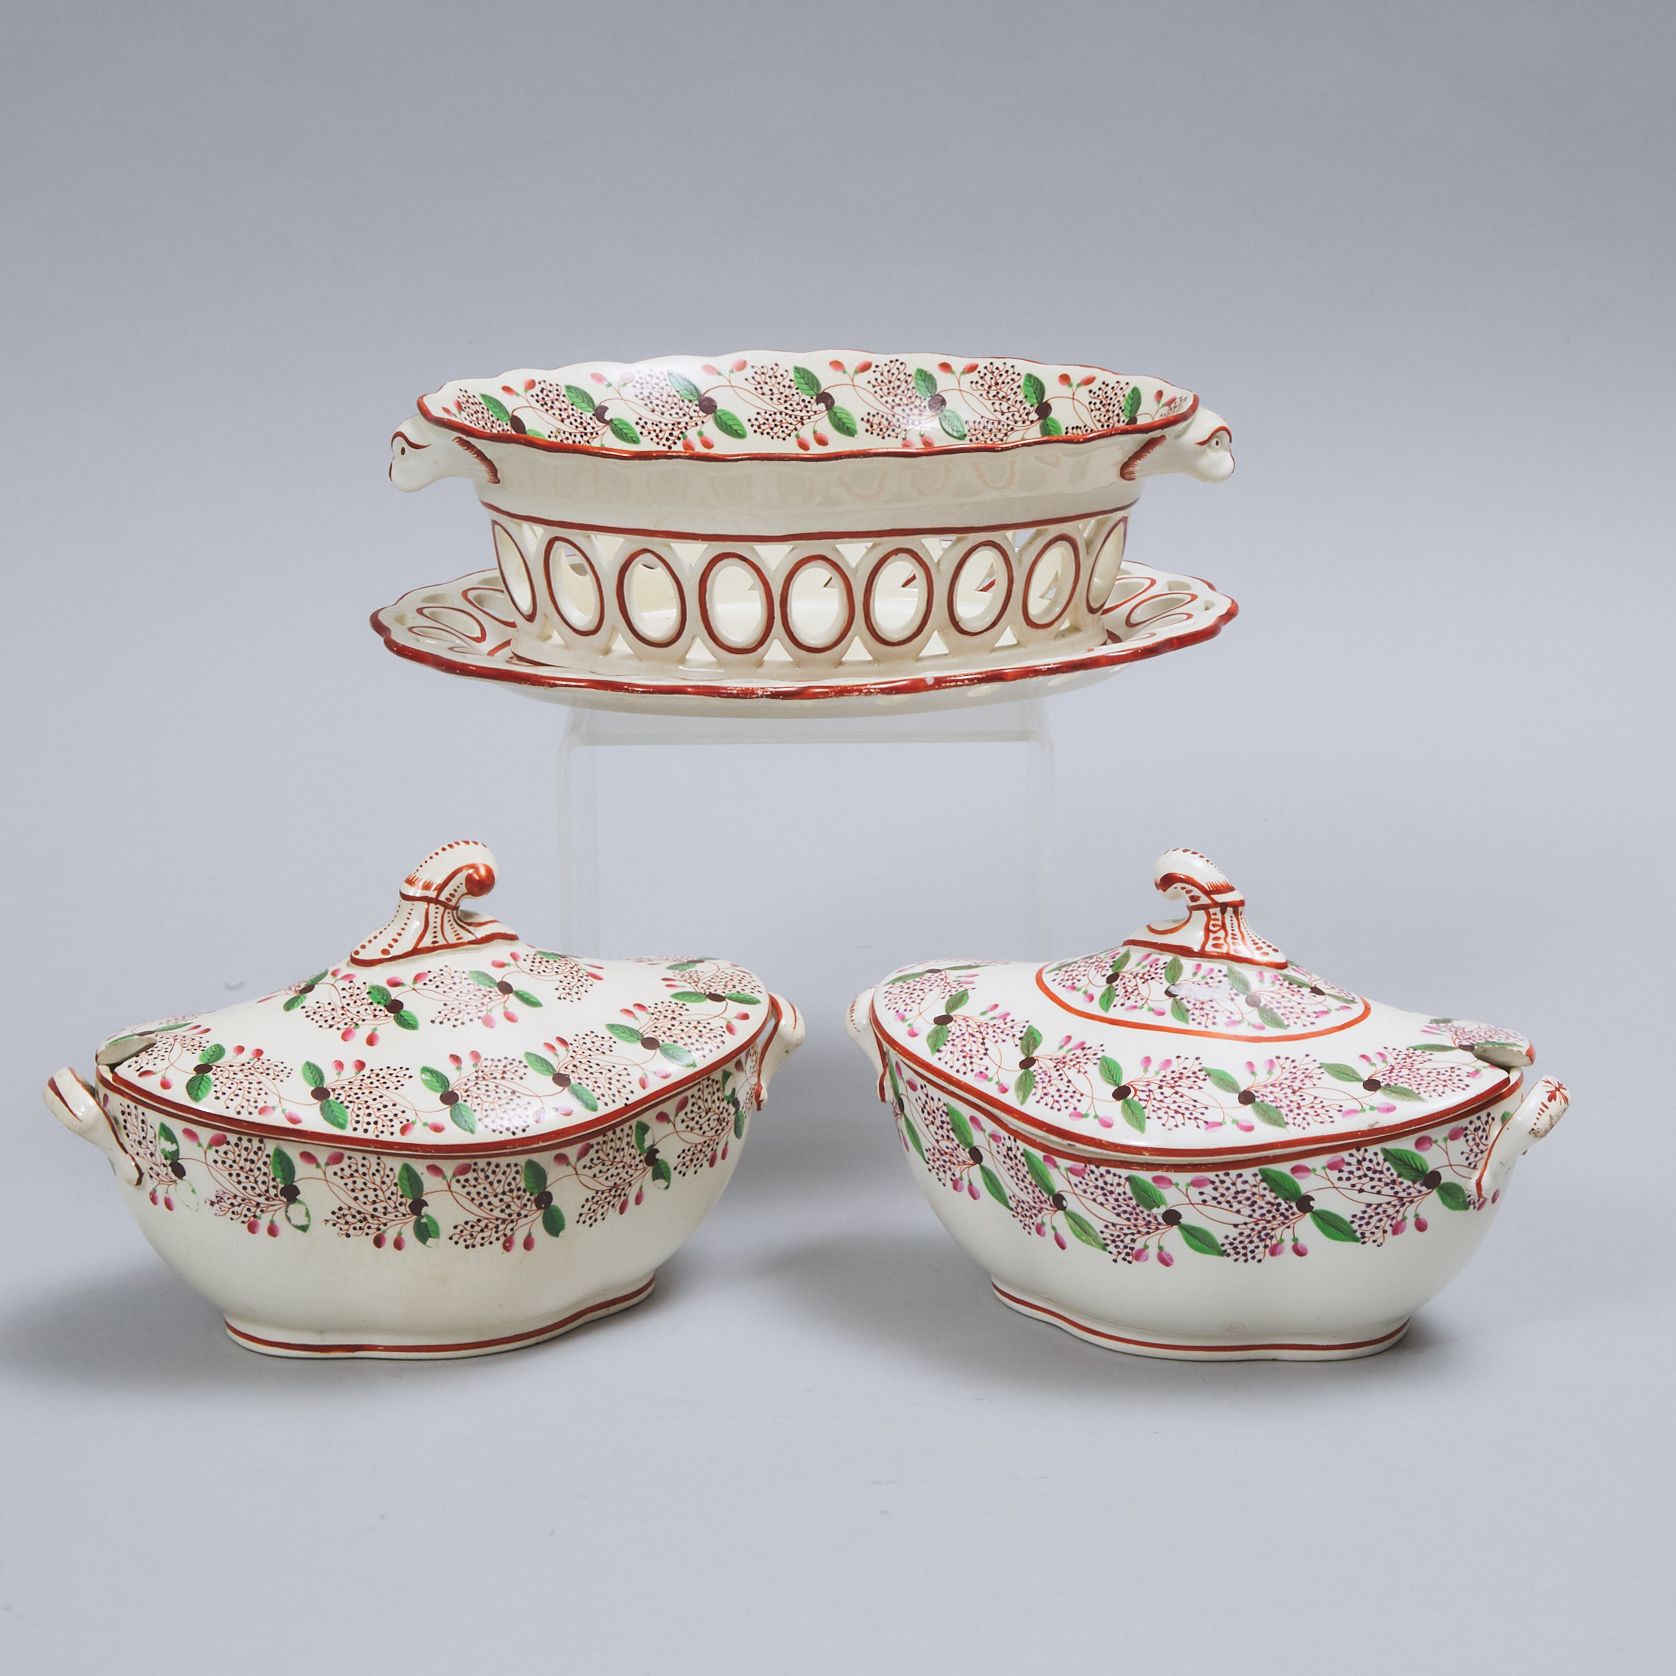 Pair of Spode Creamware Sauce Tureens and an Oval Basket on Stand, c.1810